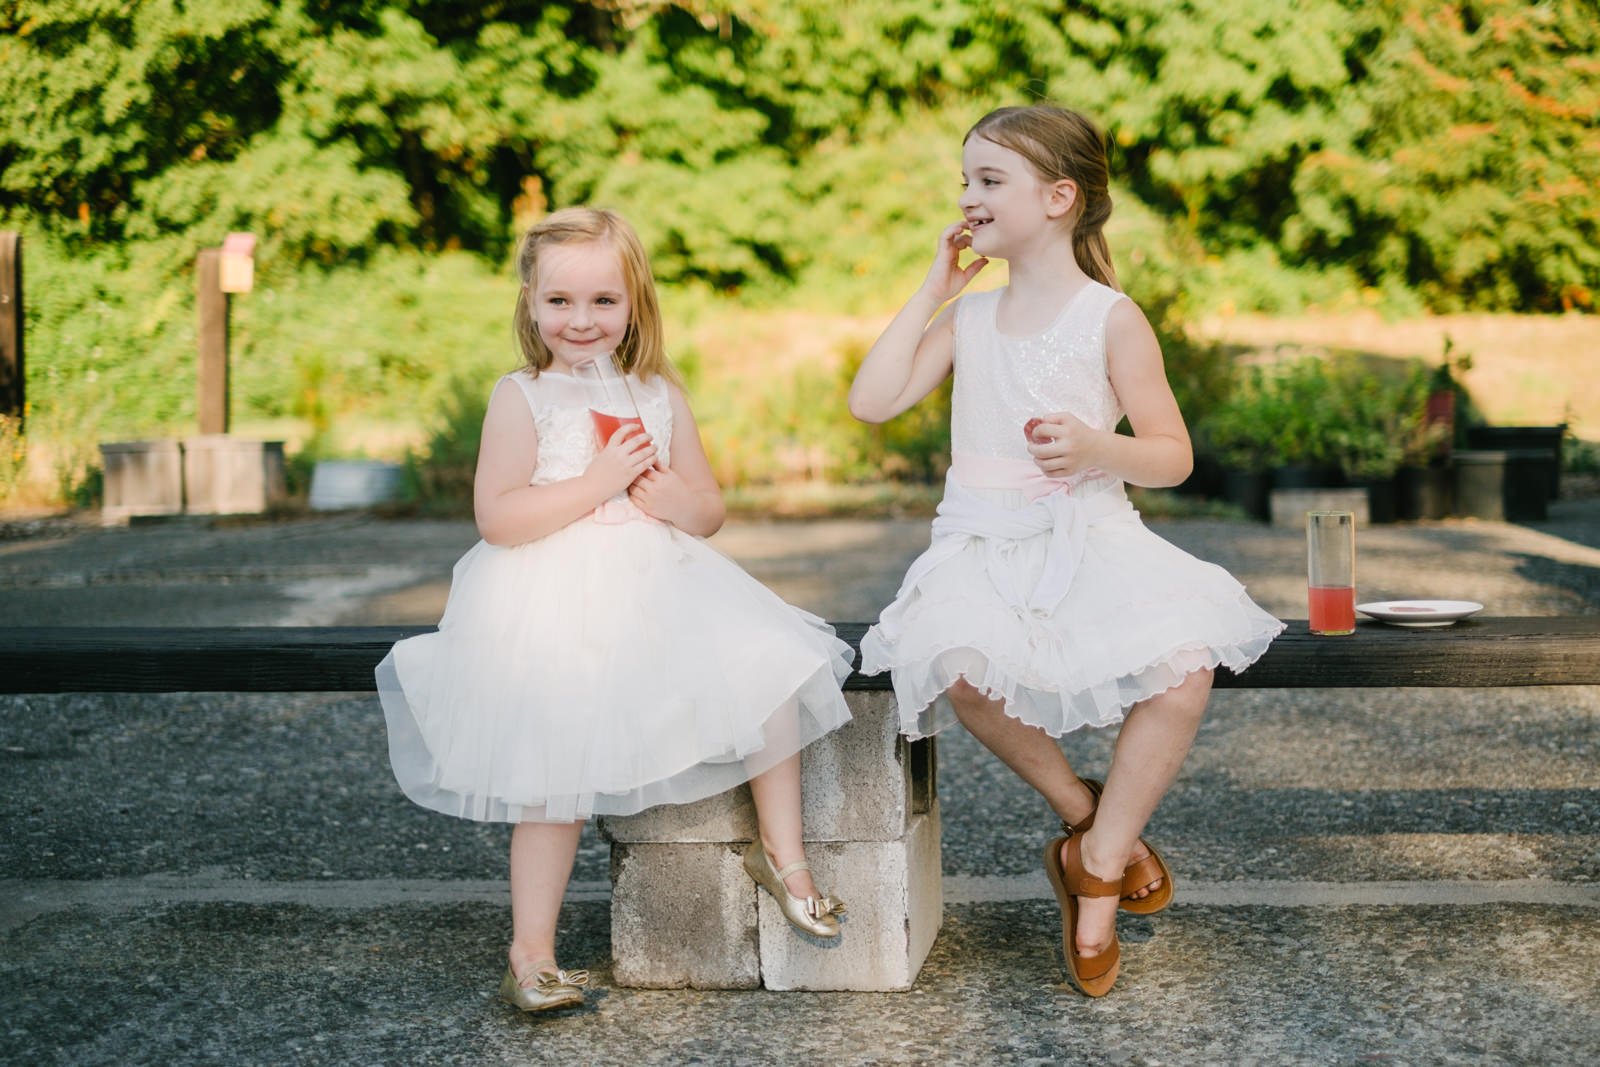  Girls in white dresses sit on bench outside during wedding reception with fruit punch 